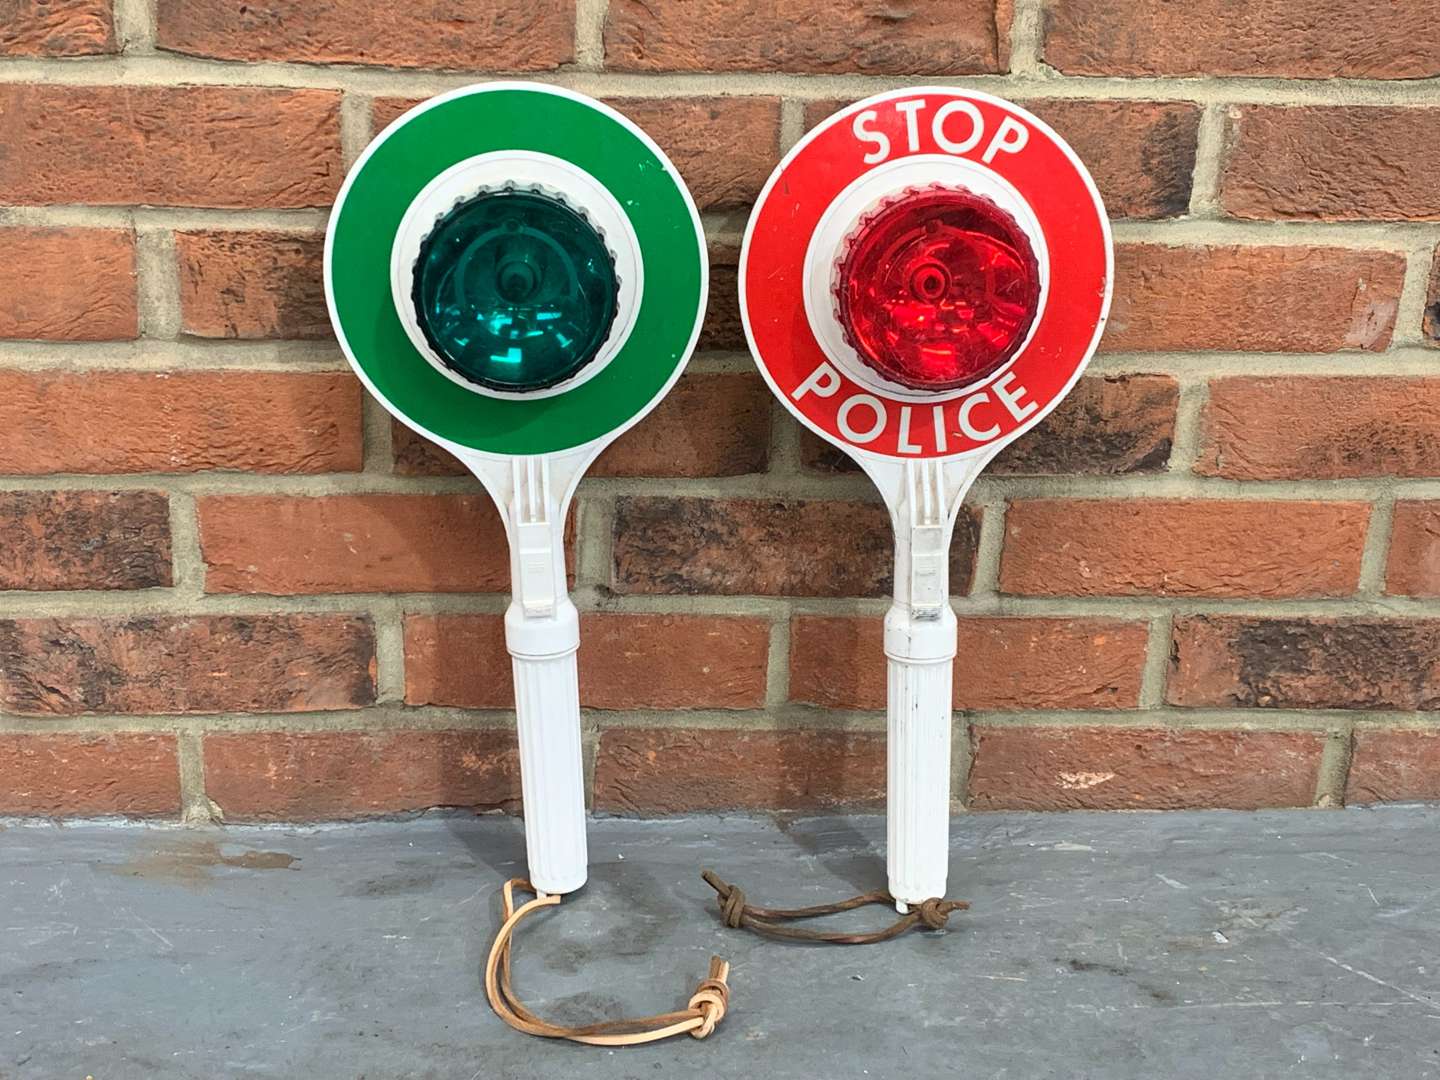 <p>Two Police Hand Stop/Go Signals&nbsp;</p>